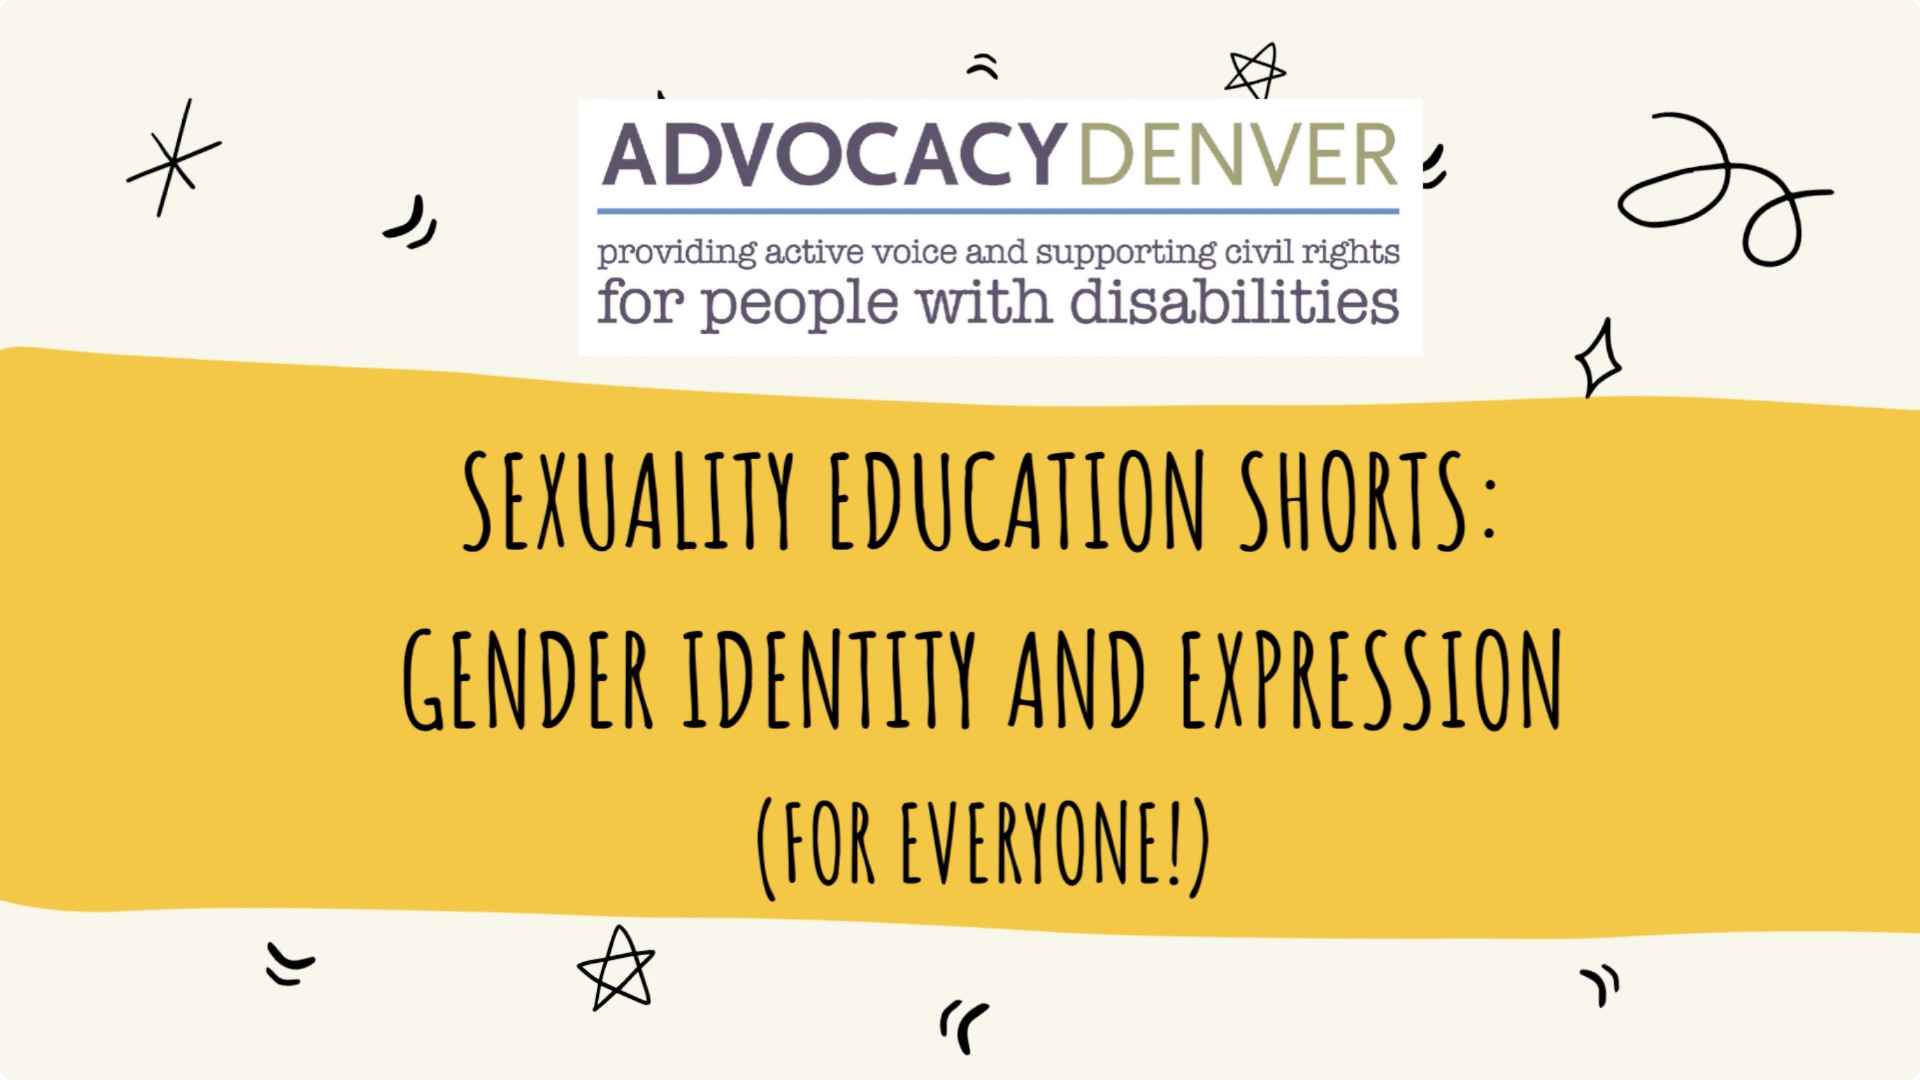 Sexuality Education Shorts Gender Identity And Expression Advocacydenver